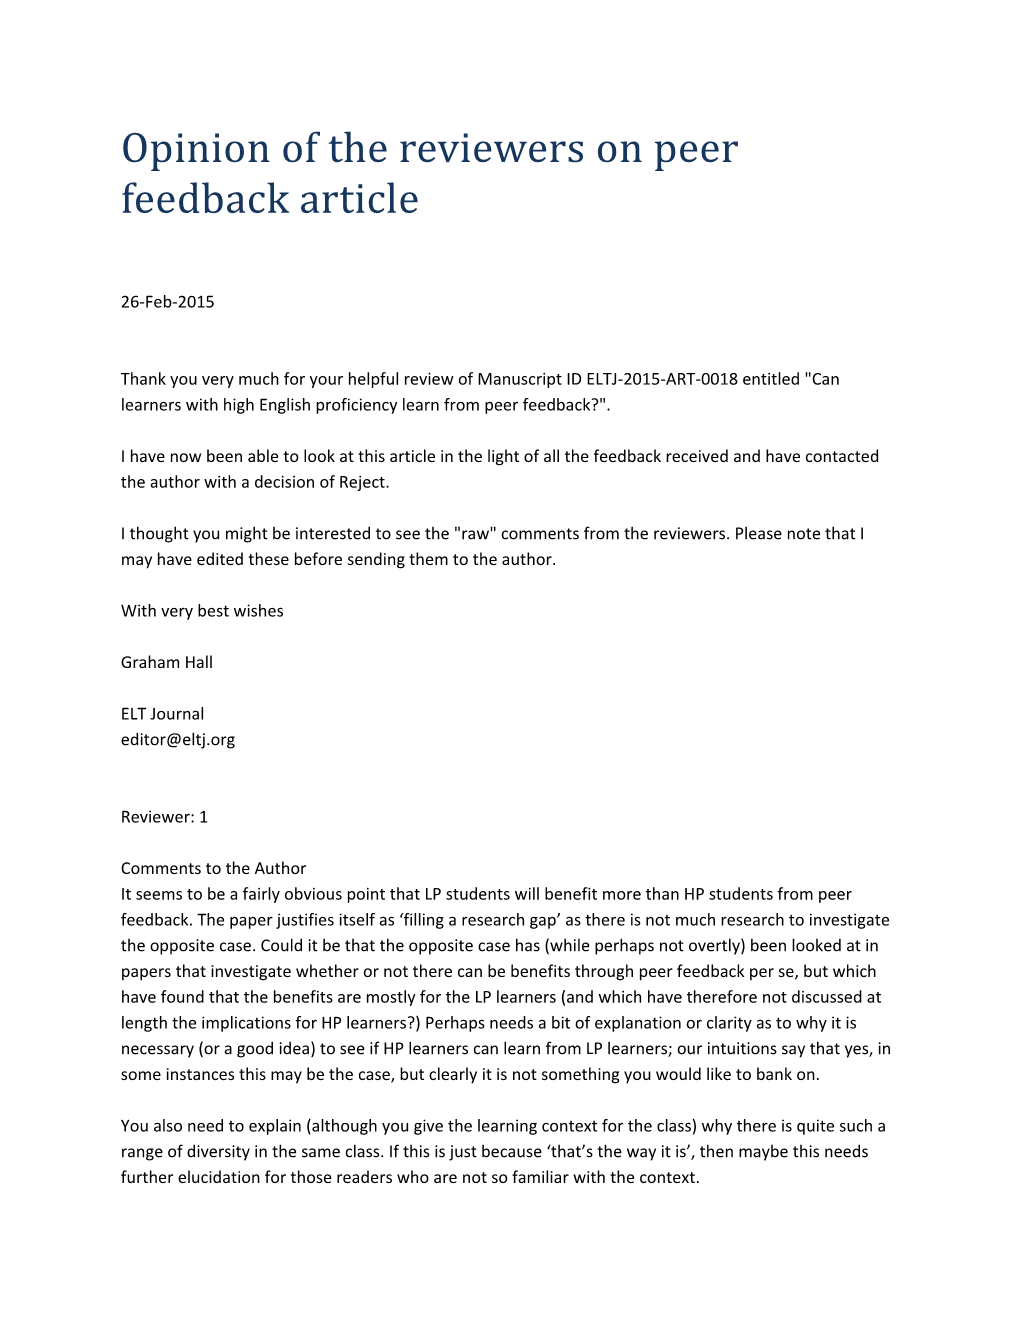 Opinion of the Reviewers on Peer Feedback Article